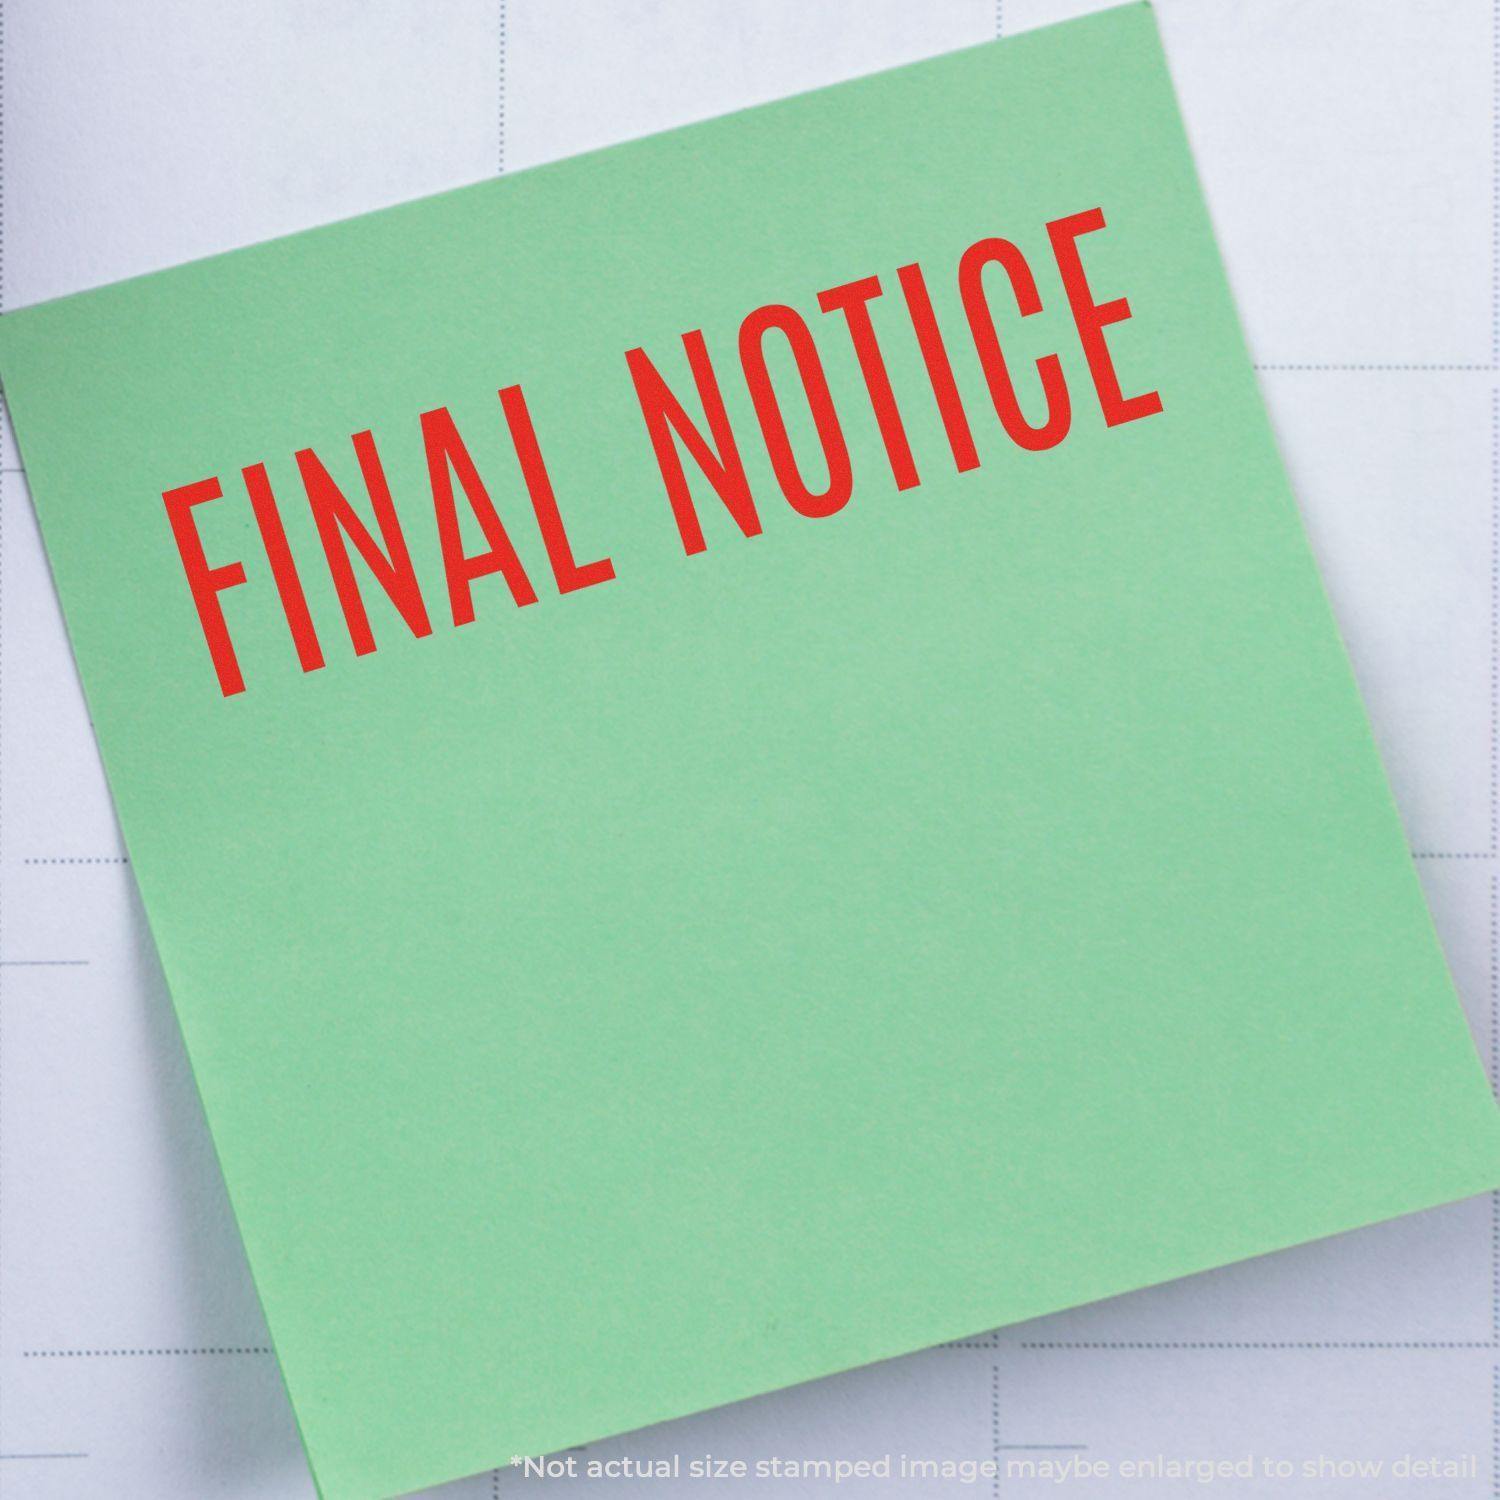 A stock office rubber stamp with a stamped image showing how the text "FINAL NOTICE" in a large narrow font is displayed after stamping.